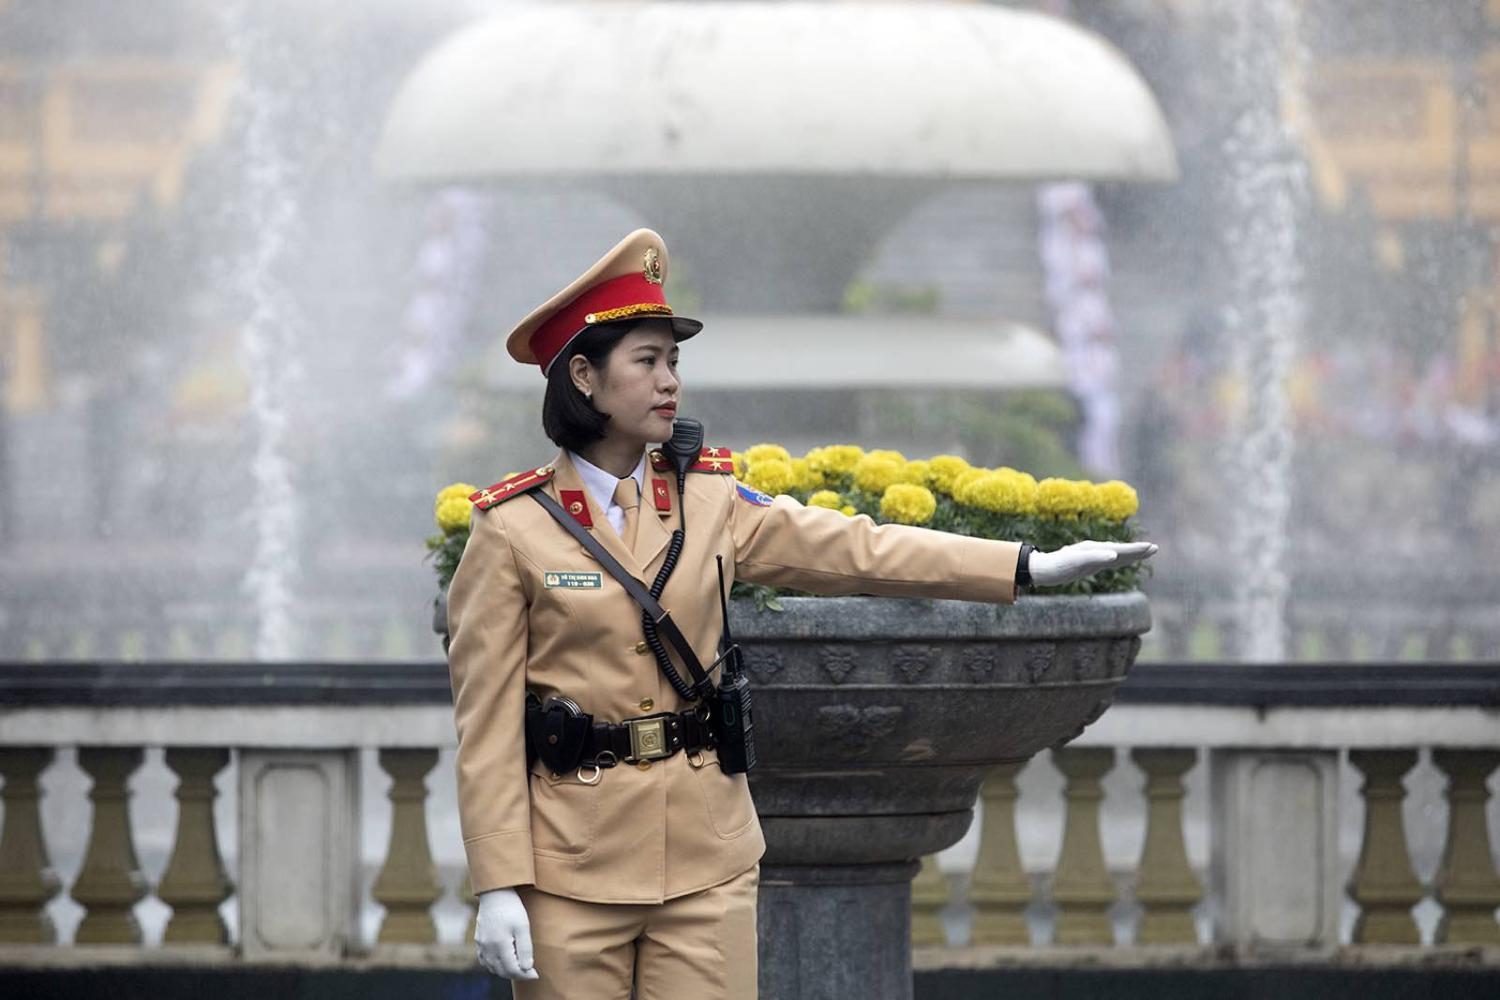 Women’s employment in Vietnam’s security sector is limited and affects the state’s ability to respond to women’s security needs (Photo: White House/Flickr)